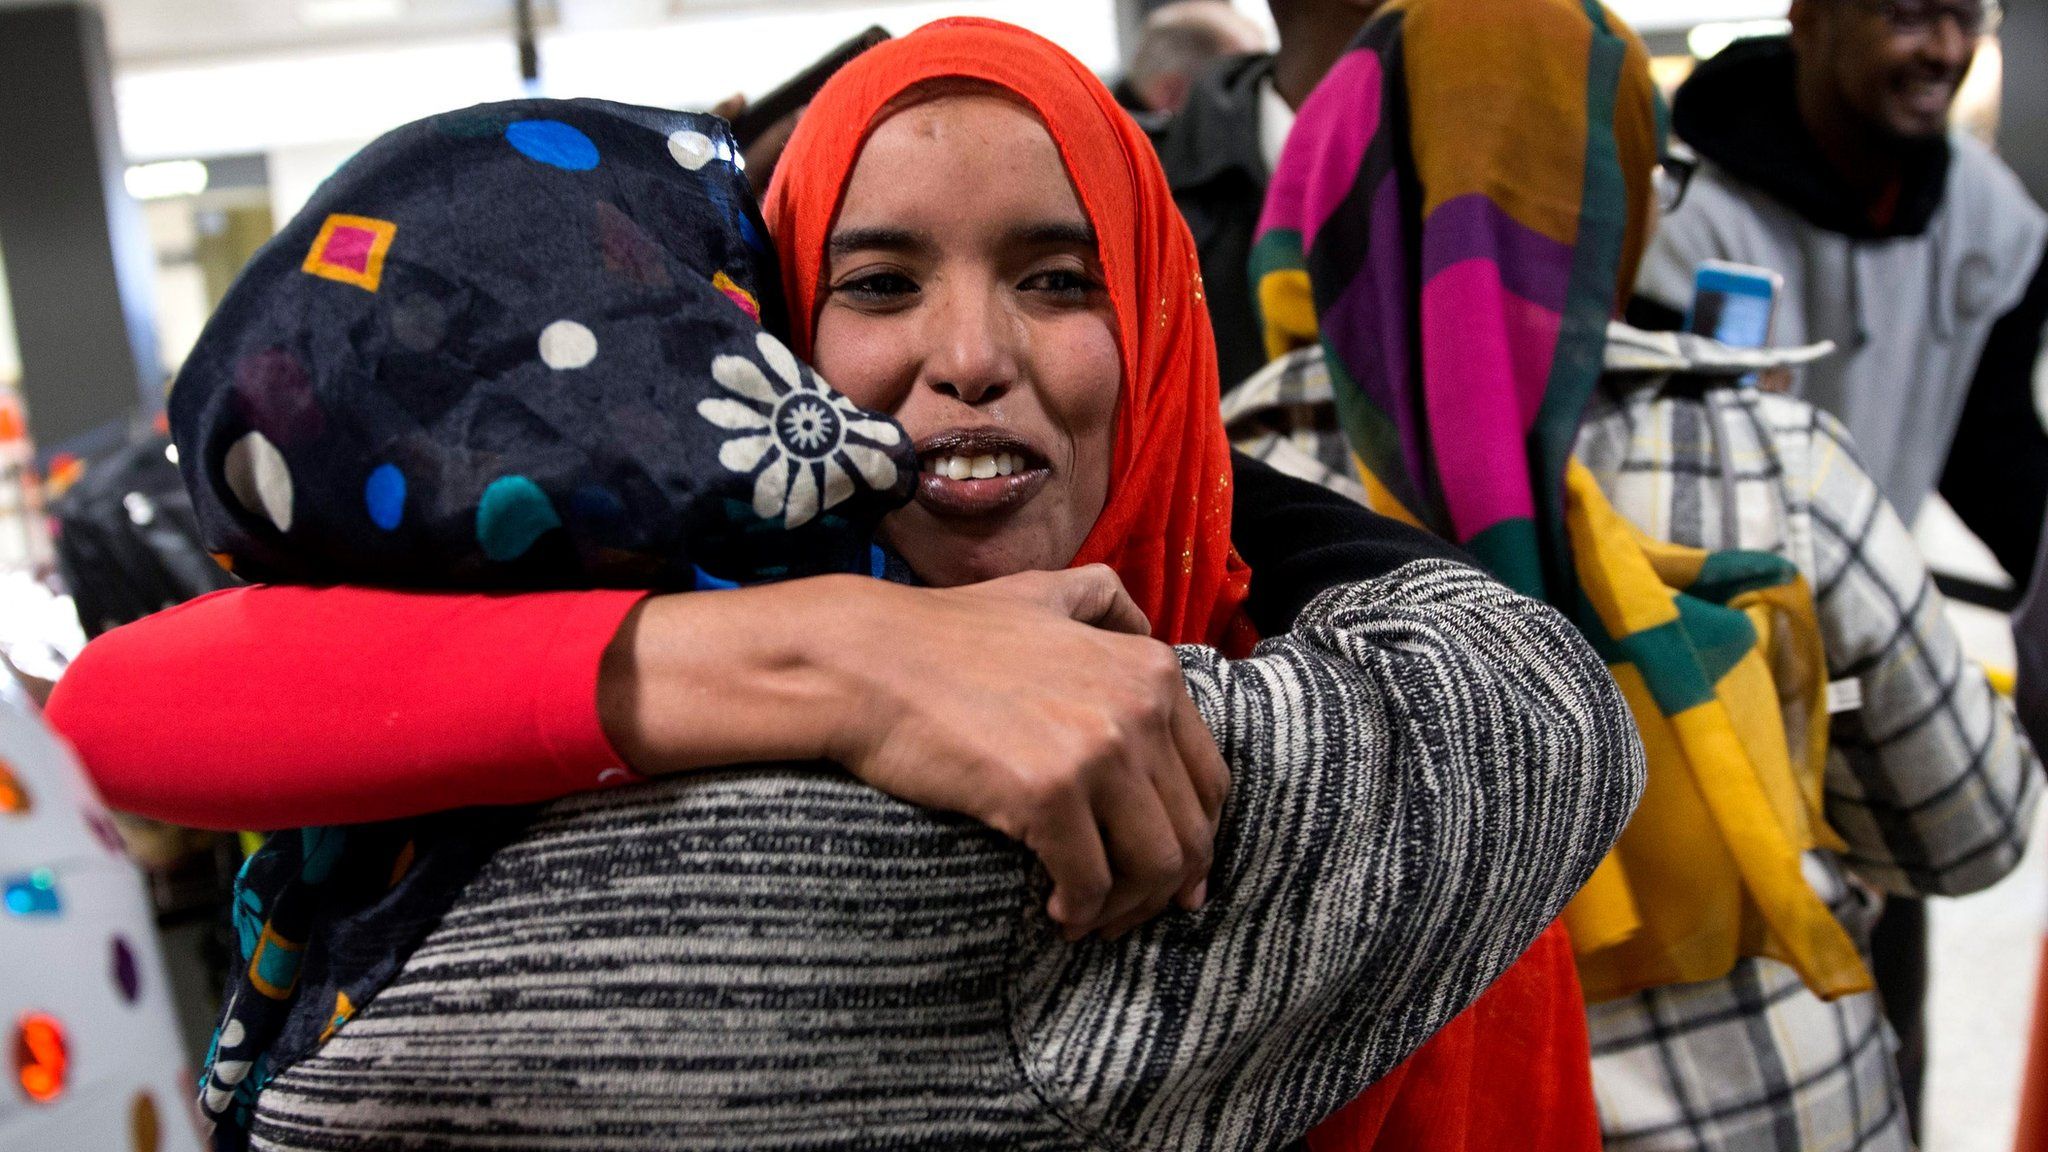 Zaura Warsma (L) welcomes her daughter Najma Abdishakur (R), a Somali national who was denied entry under the Trump administration travel ban, after she cleared customs at Washington Dulles International Airport in Chantilly, Virginia, USA, 06 February 2017.